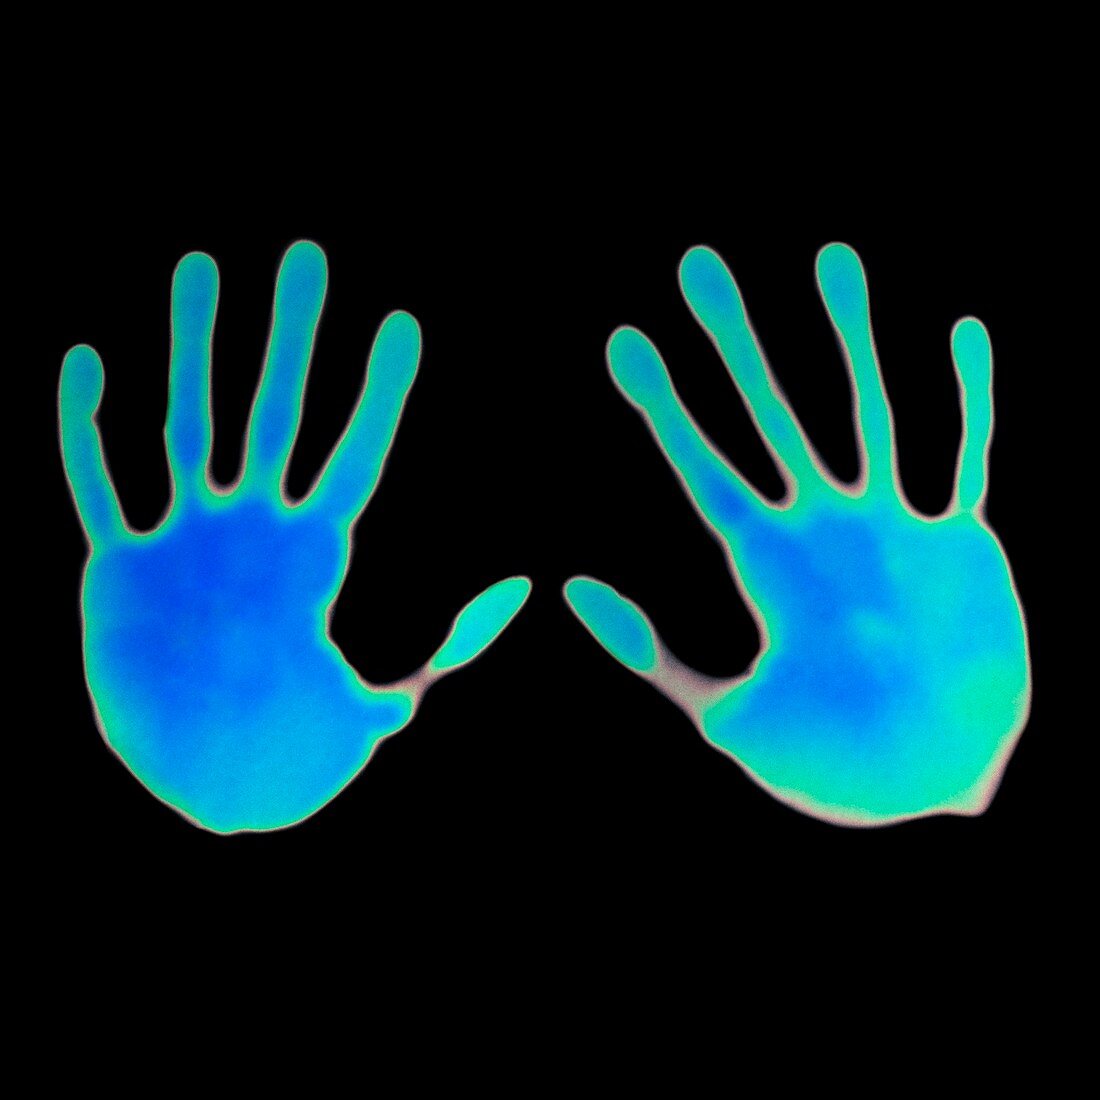 Hand prints on thermochromic paper